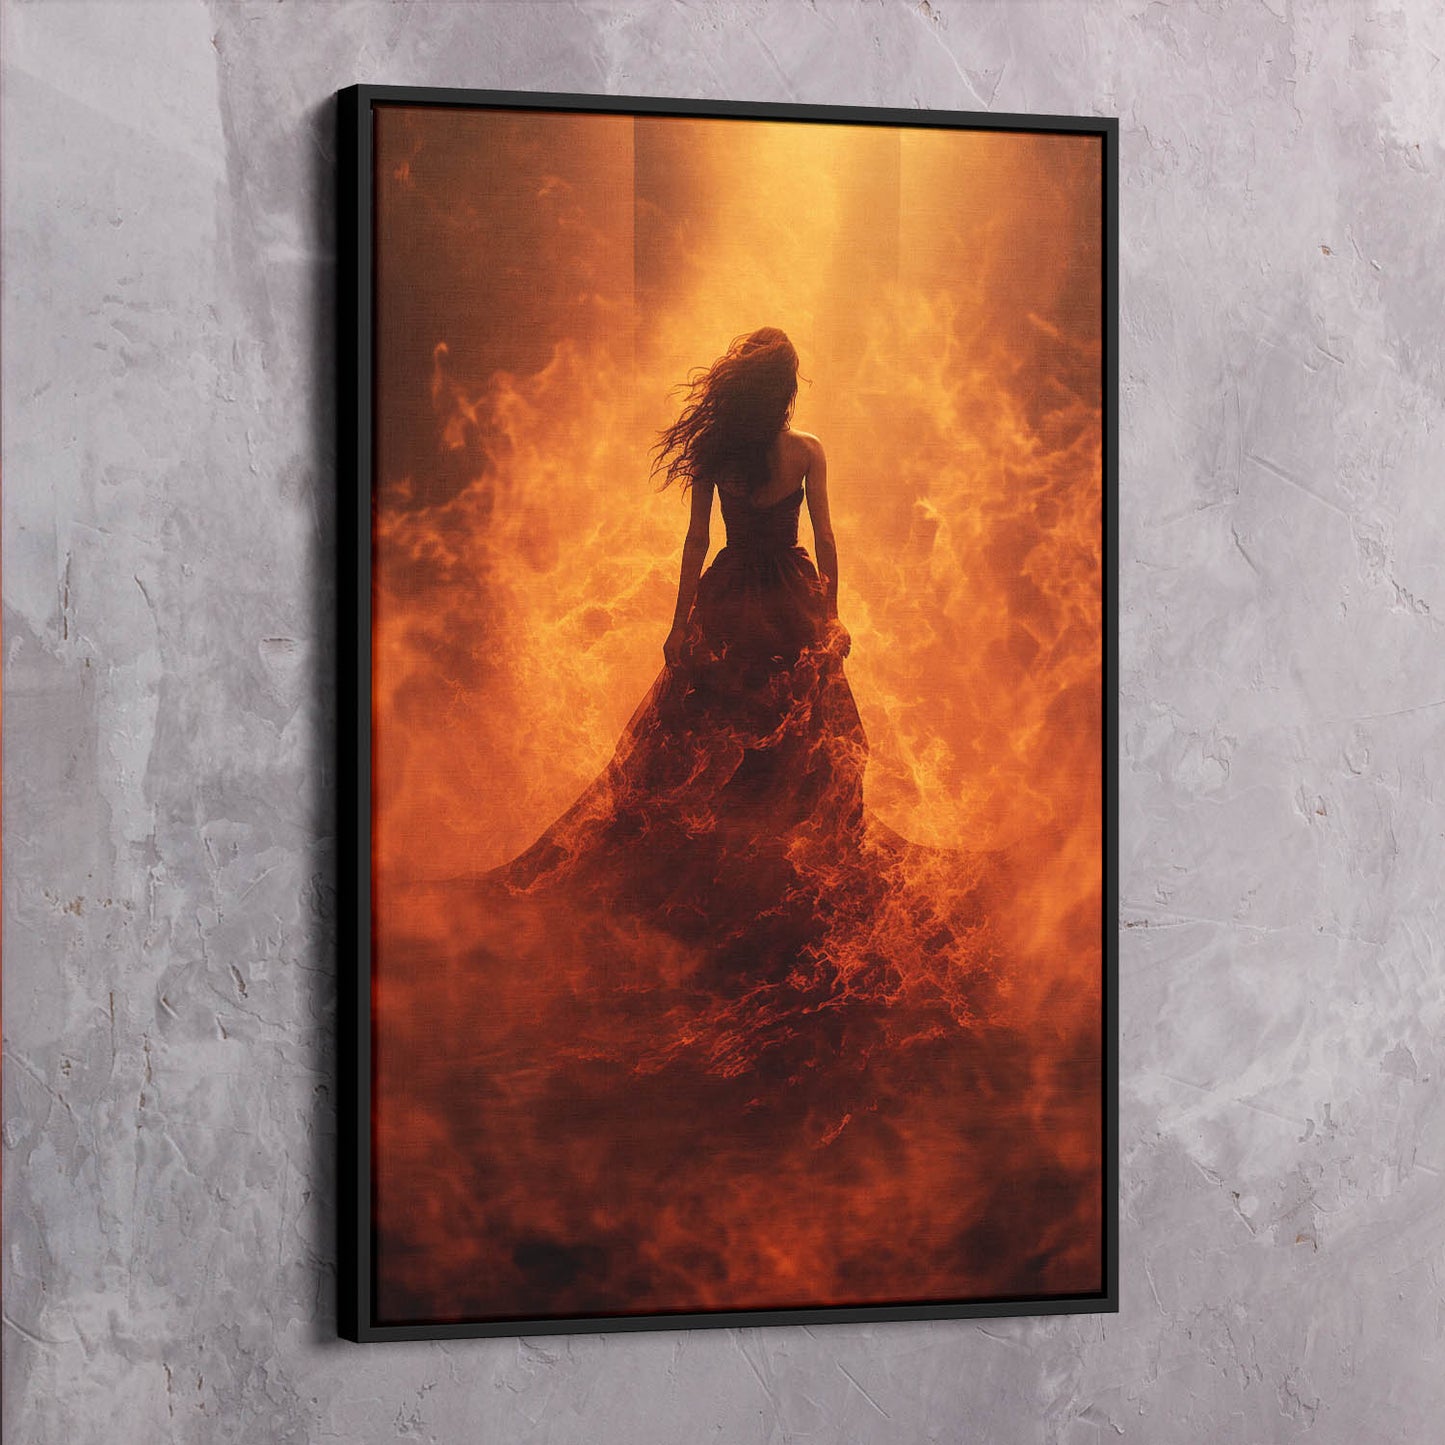 Flames of Regret - Person Could Have Become Quote Wall Art | Inspirational Wall Art Motivational Wall Art Quotes Office Art | ImpaktMaker Exclusive Canvas Art Portrait